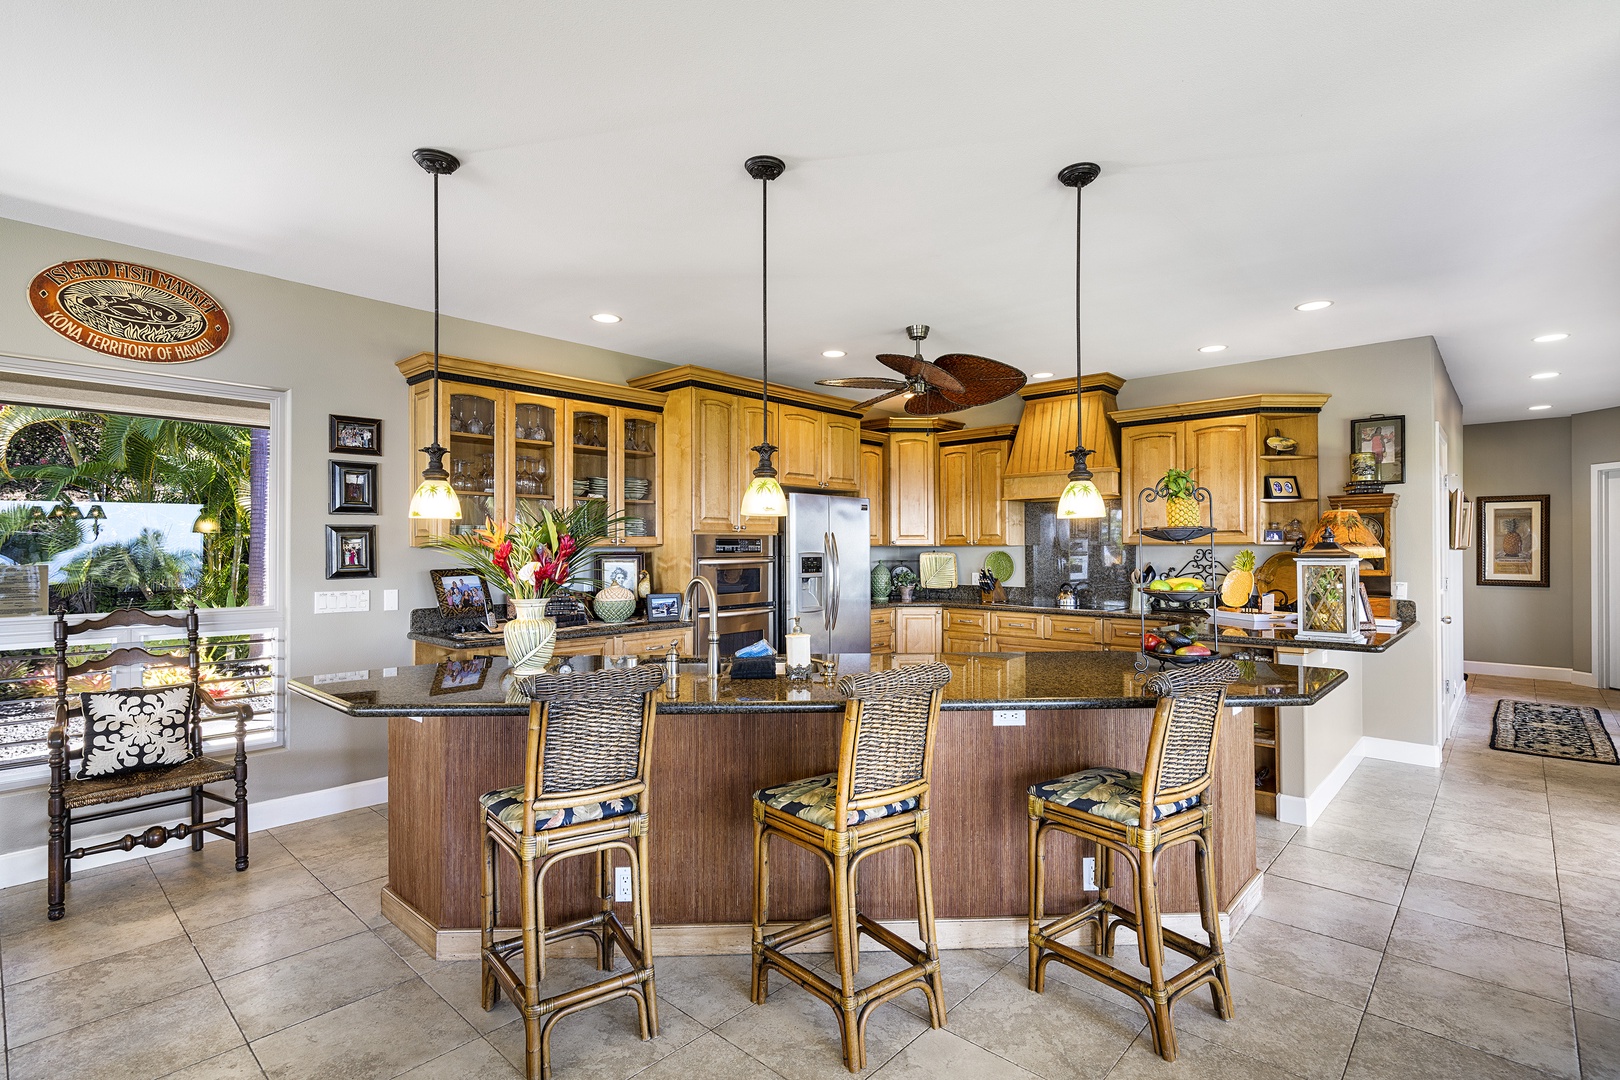 Kailua Kona Vacation Rentals, Hale Aikane - Breakfast bar perfect for chatting with the cook!